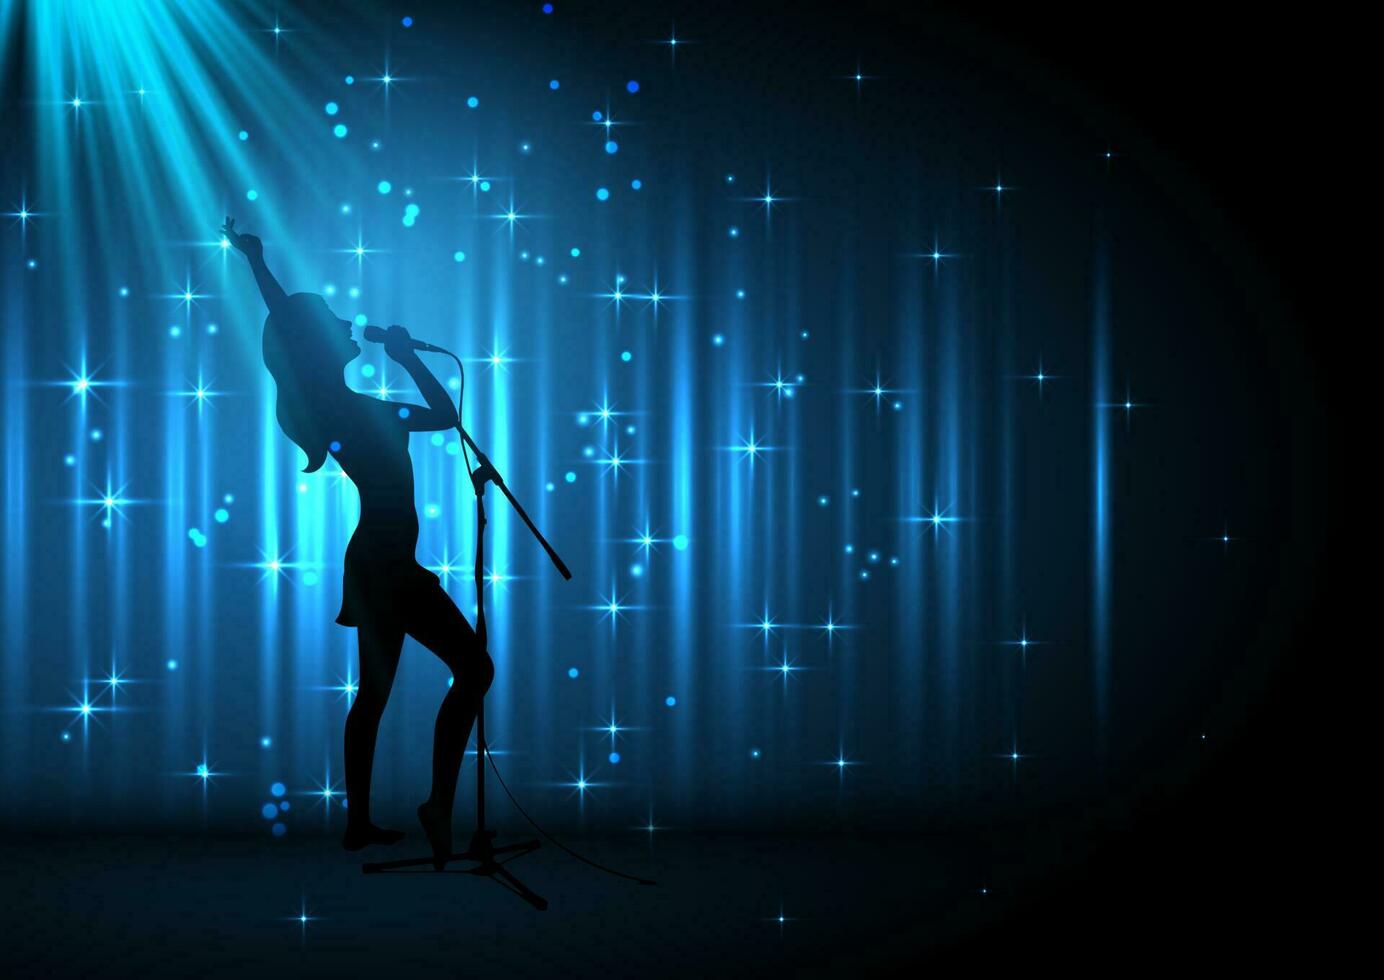 female singer on a starry background vector